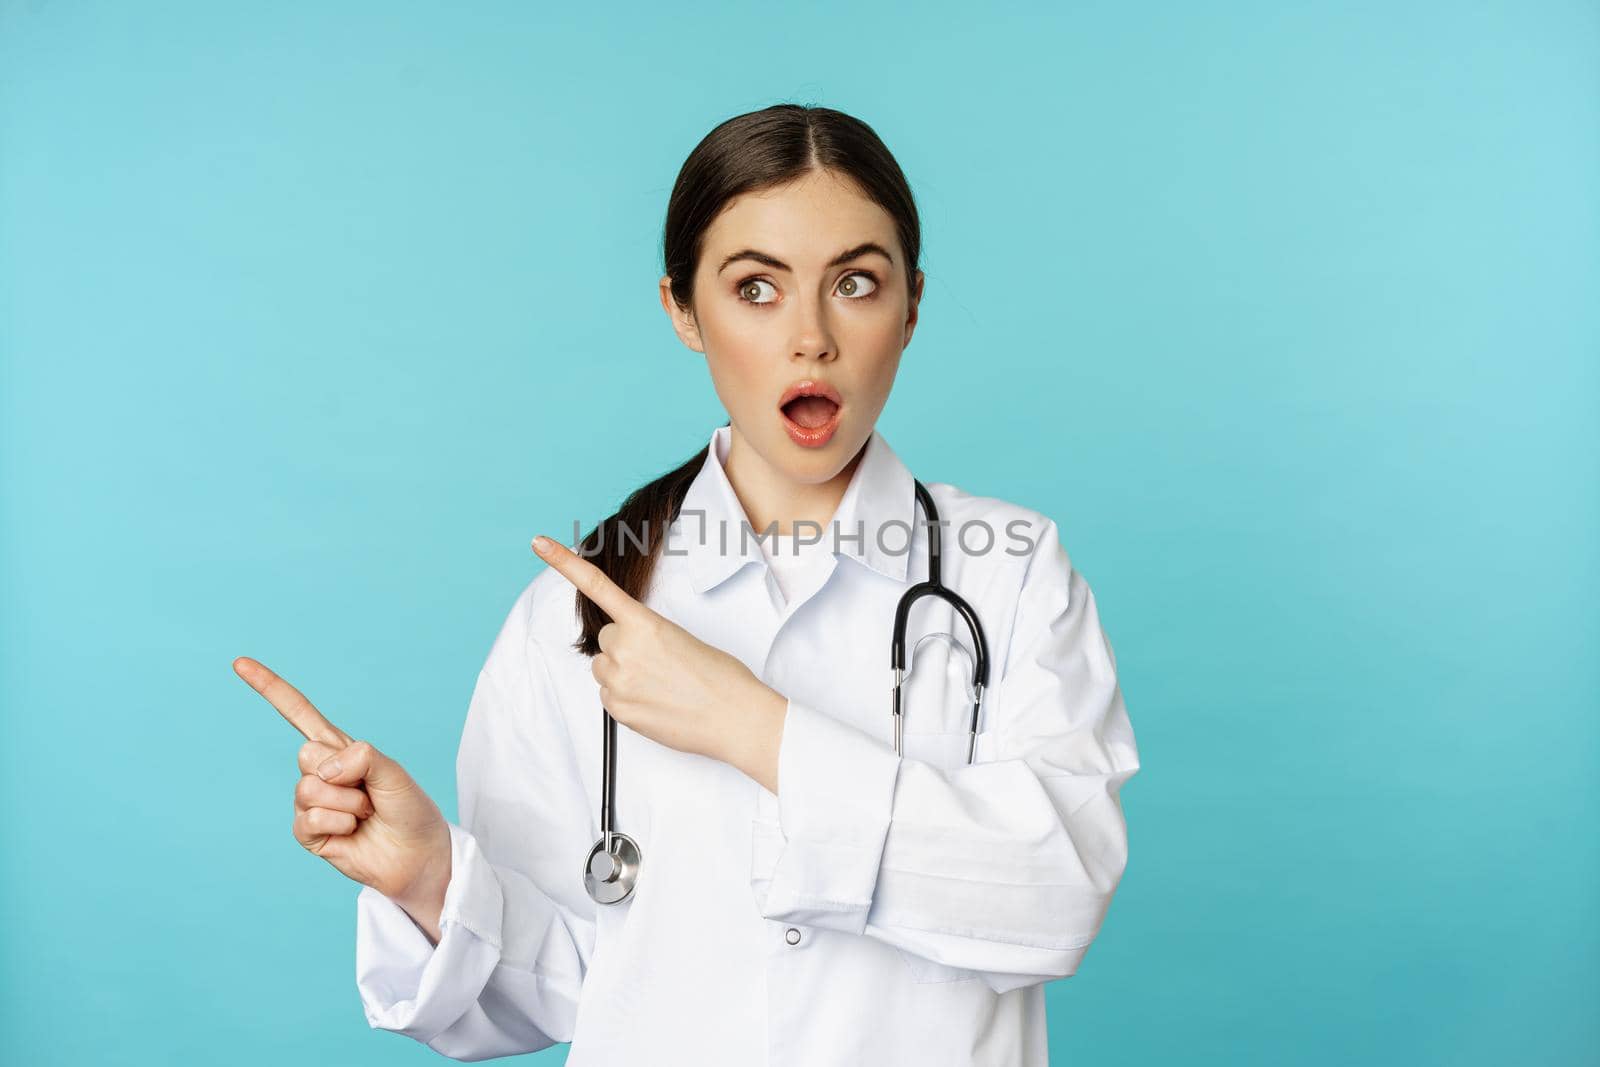 Surprised female doctor, physician with stethoscope, pointing and looking left with amazed, wow face, standing over torquoise background.